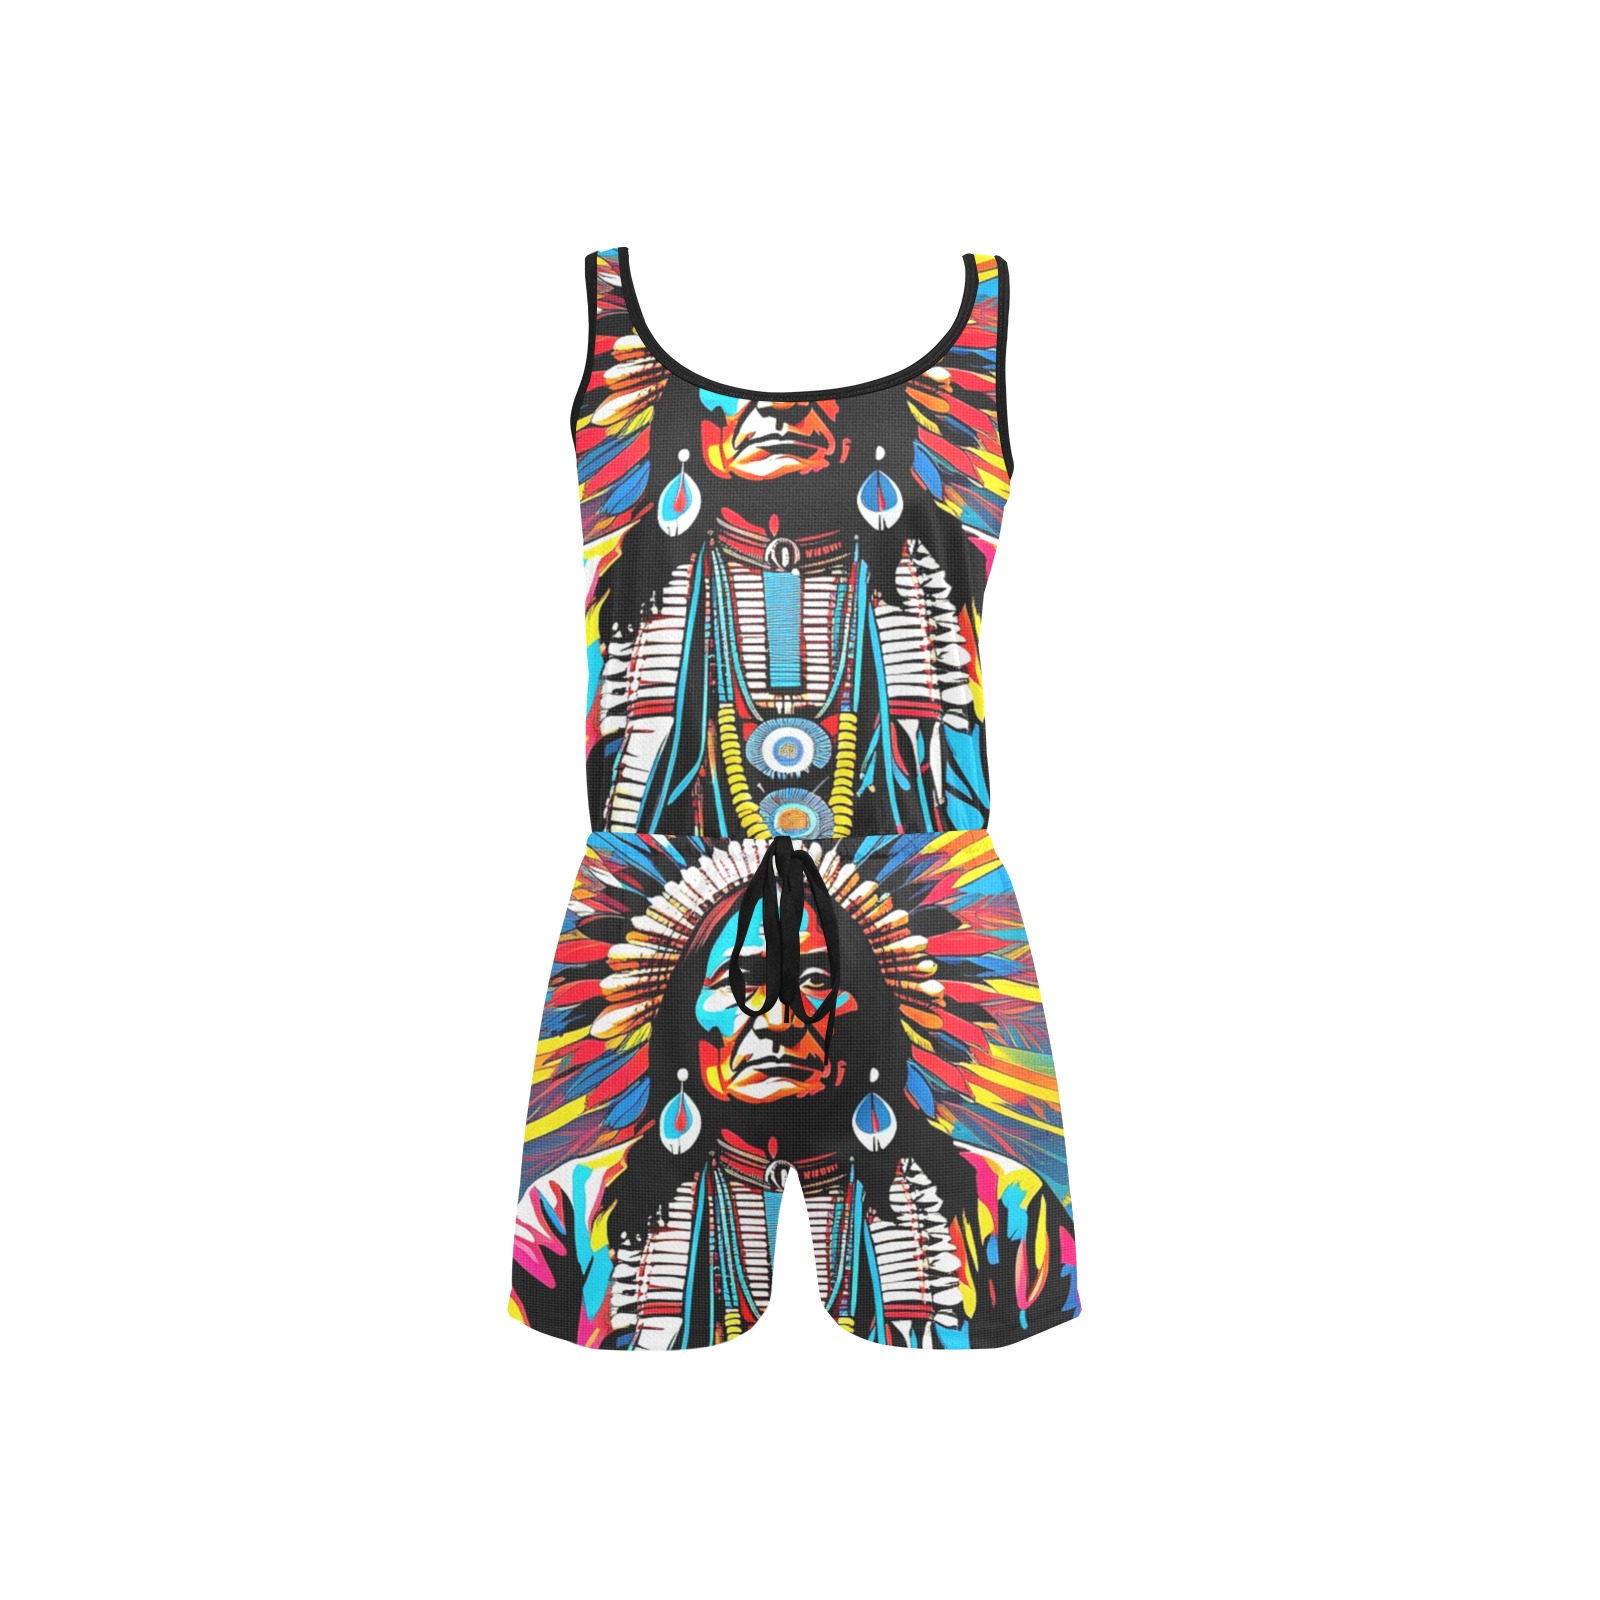 AMERICAN HERITAGE 11 All Over Print Short Jumpsuit